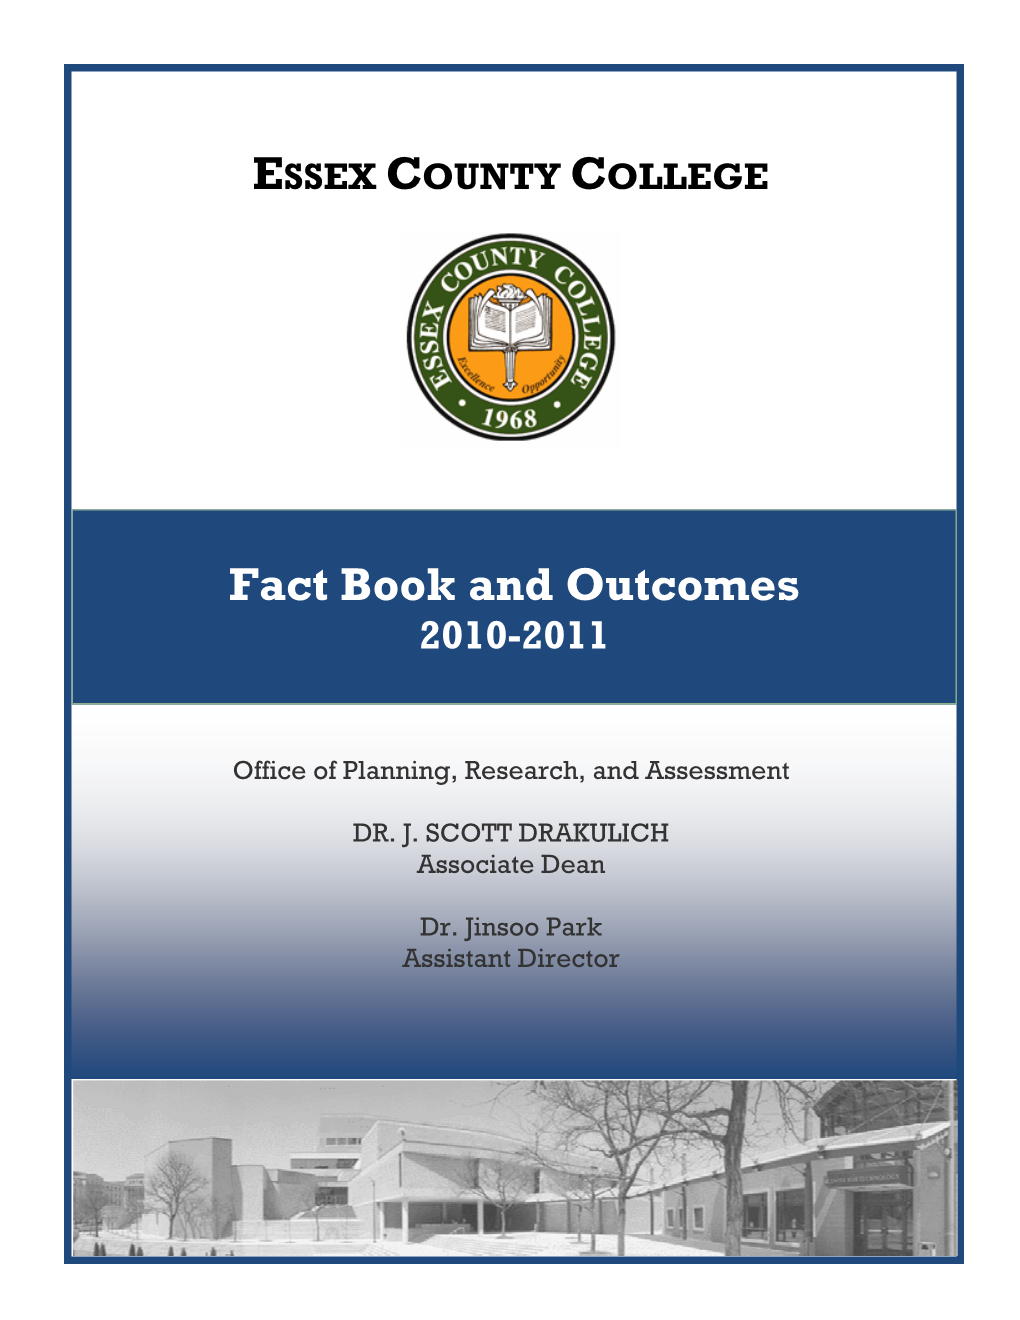 Fact Book and Outcomes 2010-2011